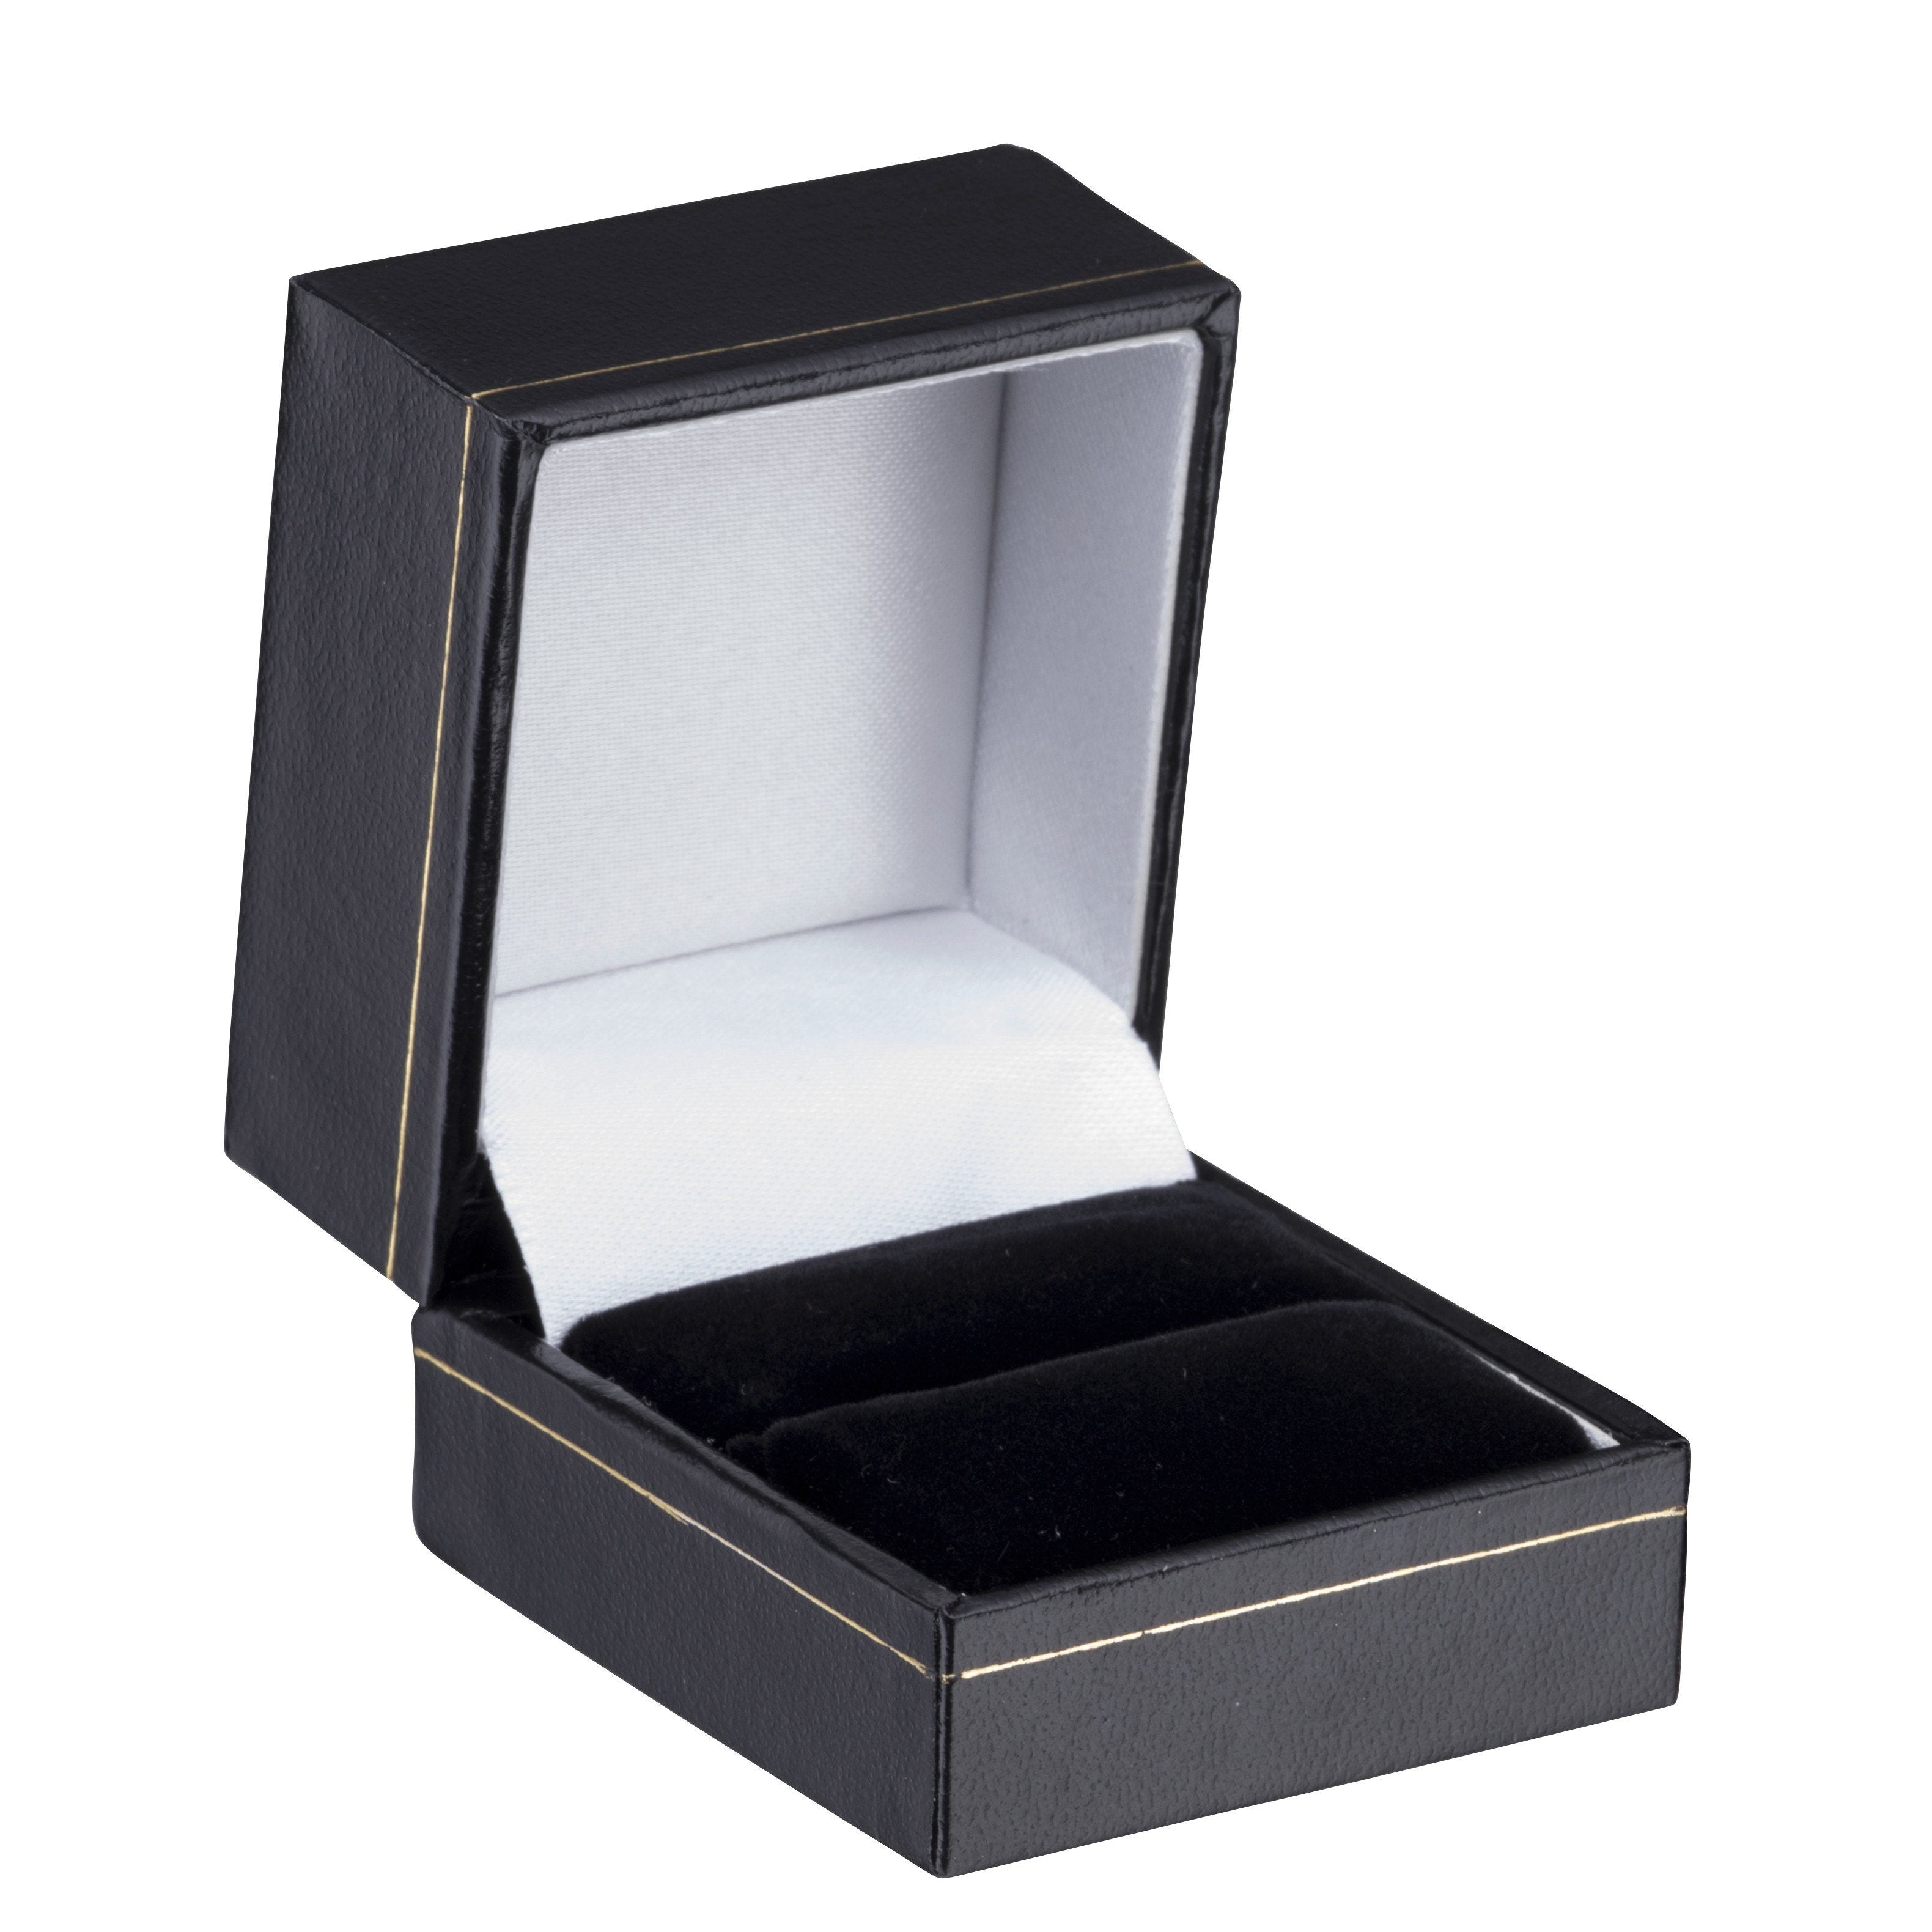 cartier ring box